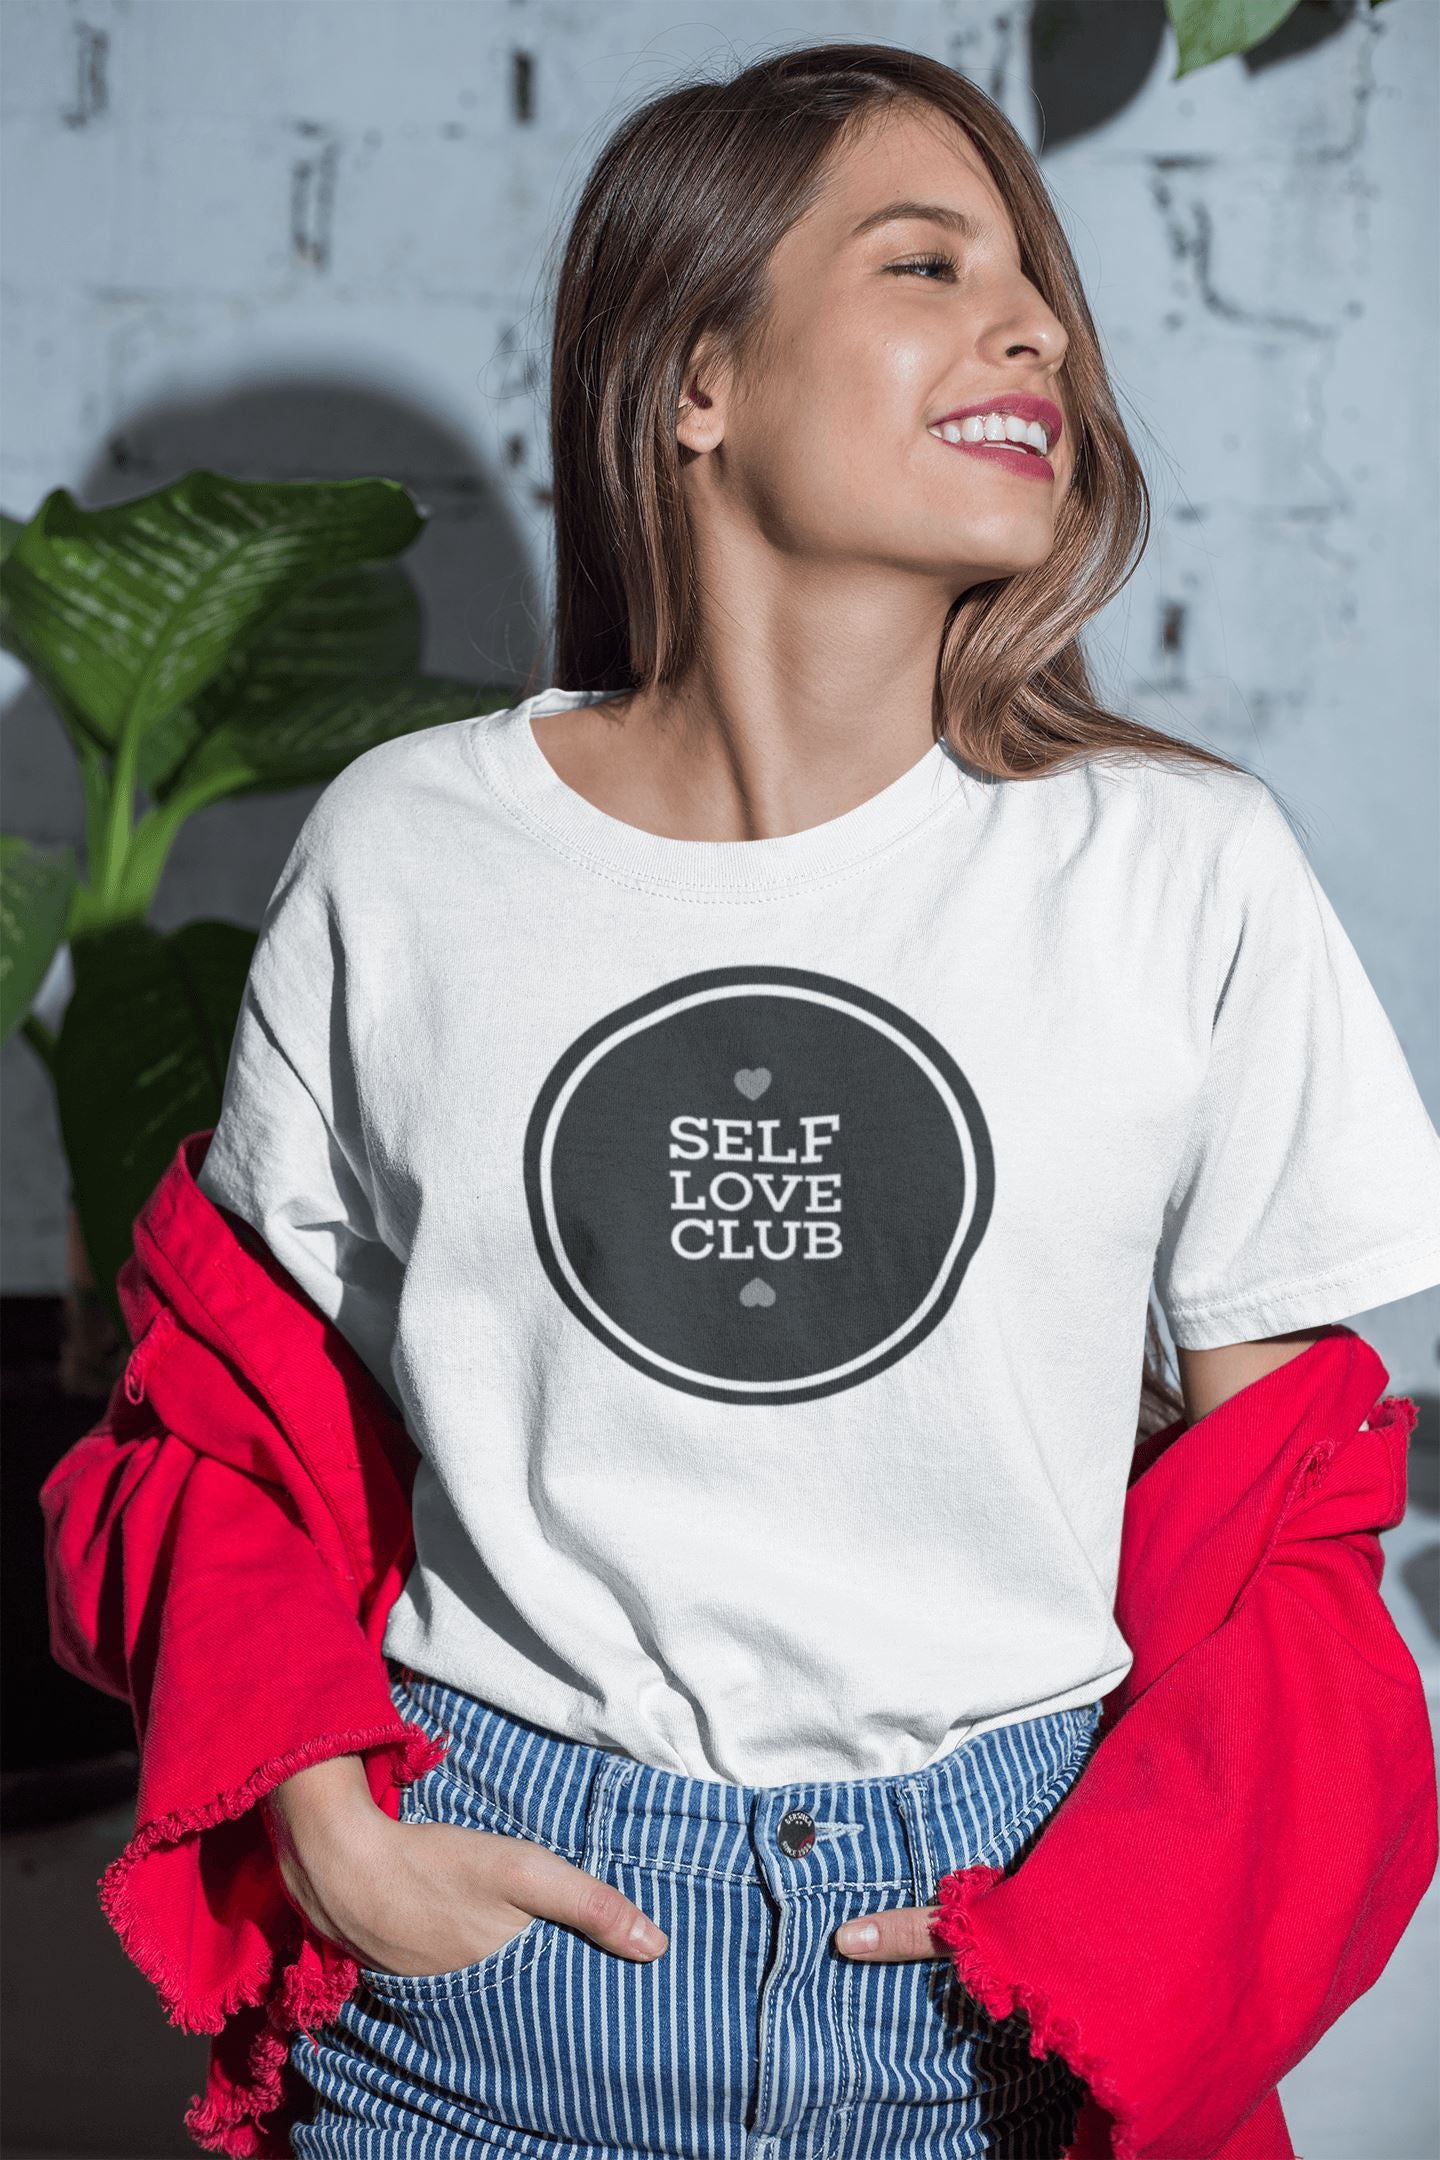 Self Love Club Special T shirt for Mental Health Supporters | Premium Design | Catch My Drift India - Catch My Drift India  clothing, female, general, gym, made in india, mental health, shirt